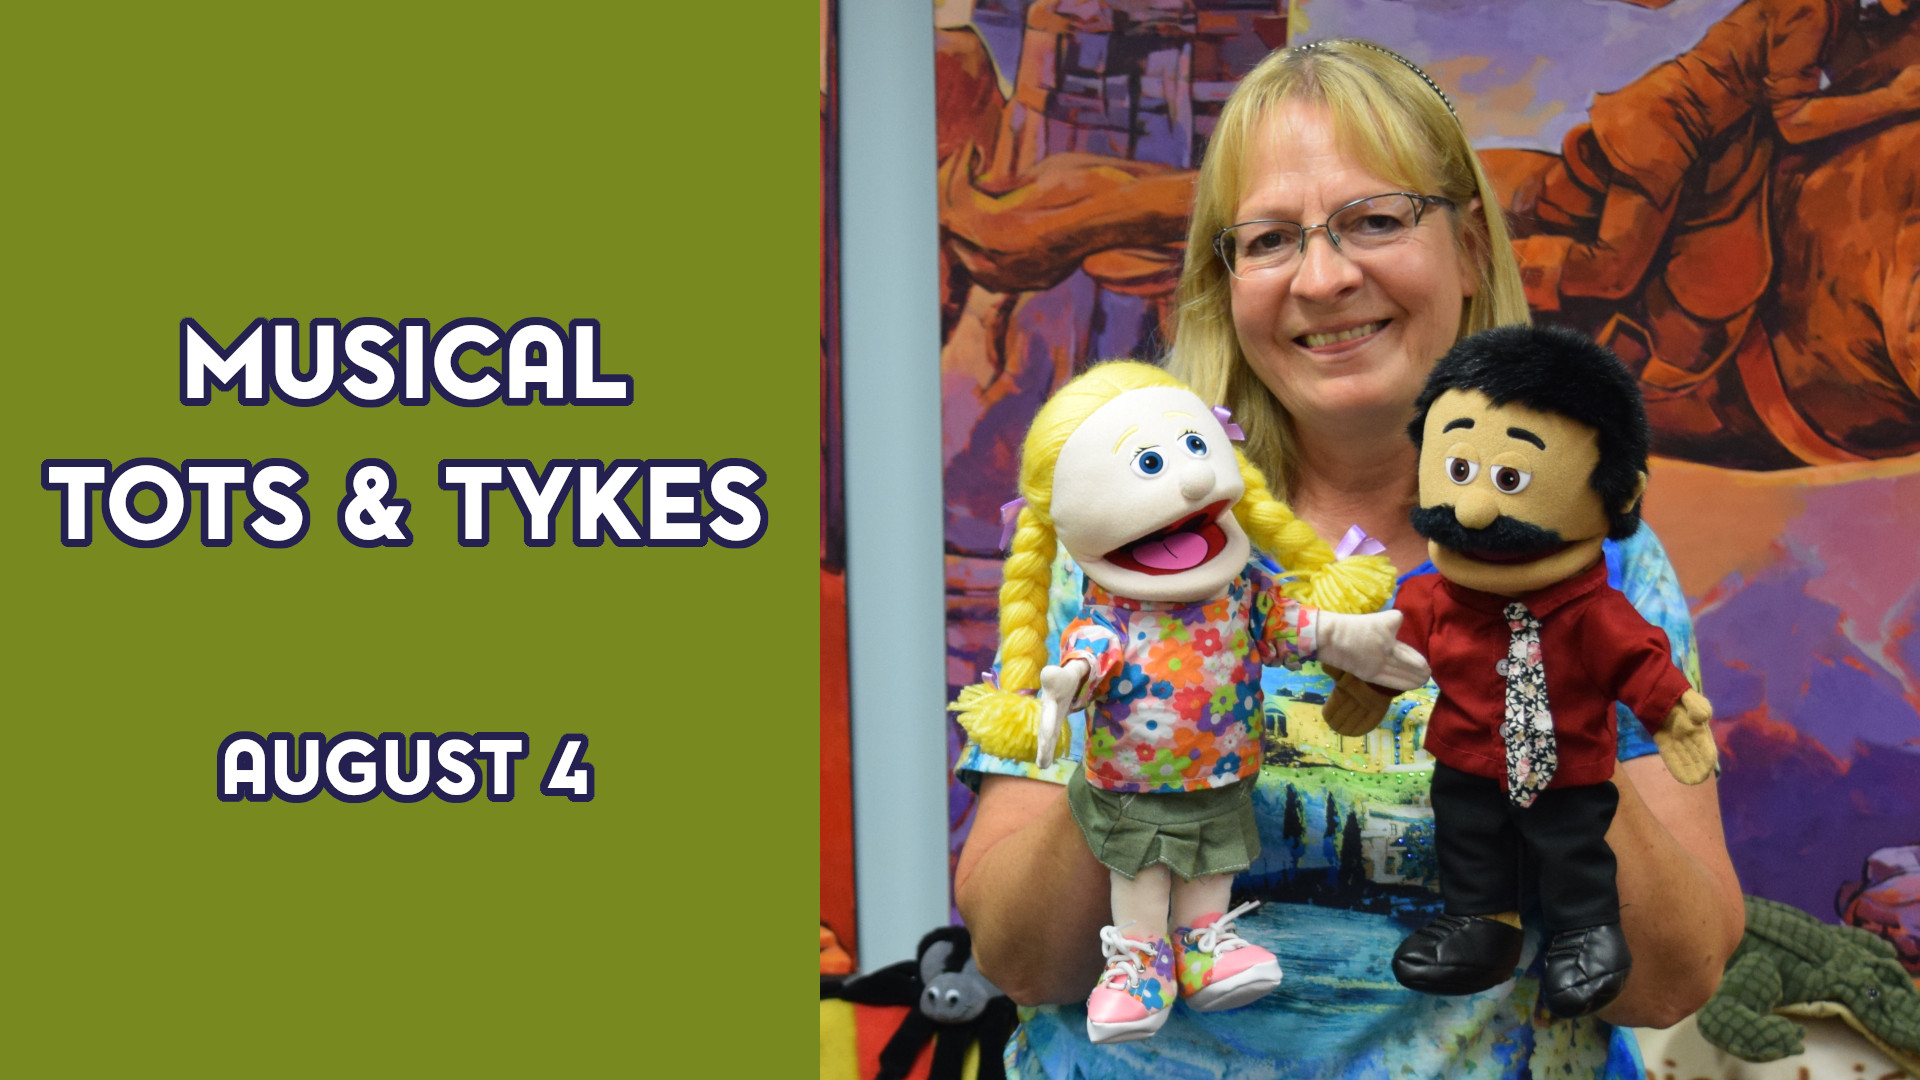 A woman holds puppets next to the text "Musical Tots & Tykes August 4"